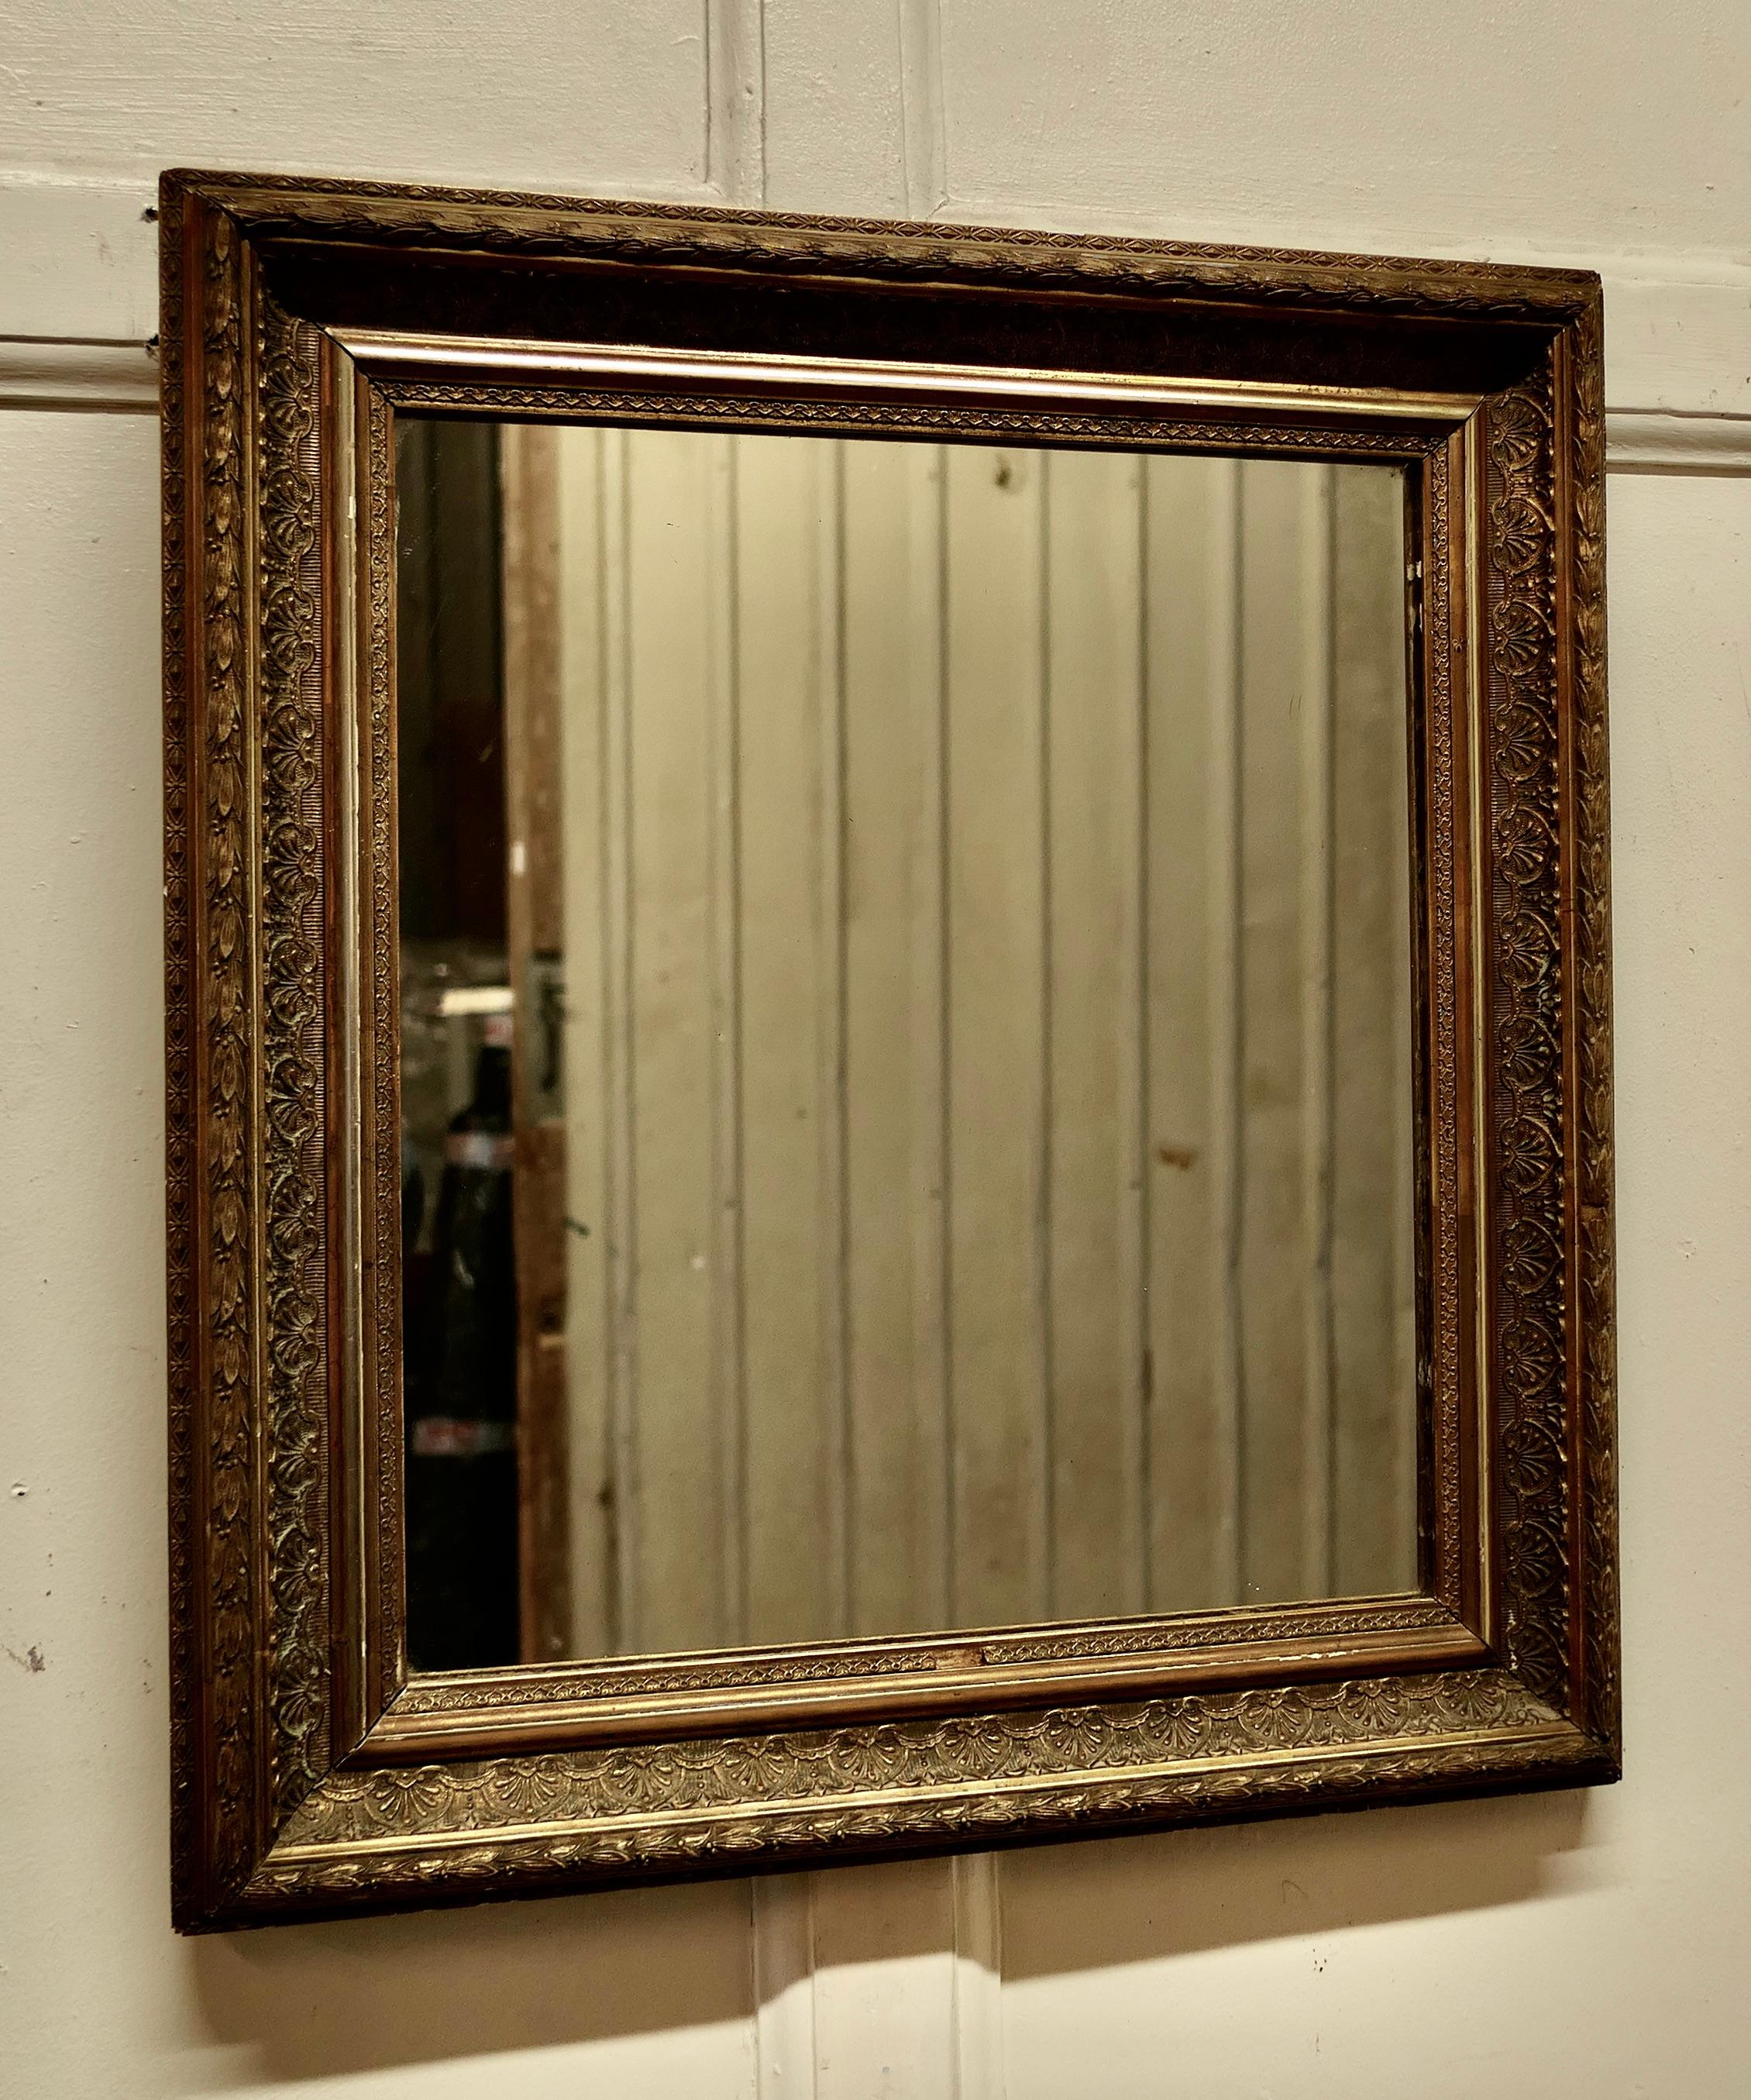 Old Rectangular Gilt mirror

The mirror has a lovely age darkened decorative Gilt frame, it is almost square
The mirror is in good Vintage condition there is one minor loss at the bottom of the frame
A lovely Piece
The Mirror is 21”x 19” and 3”